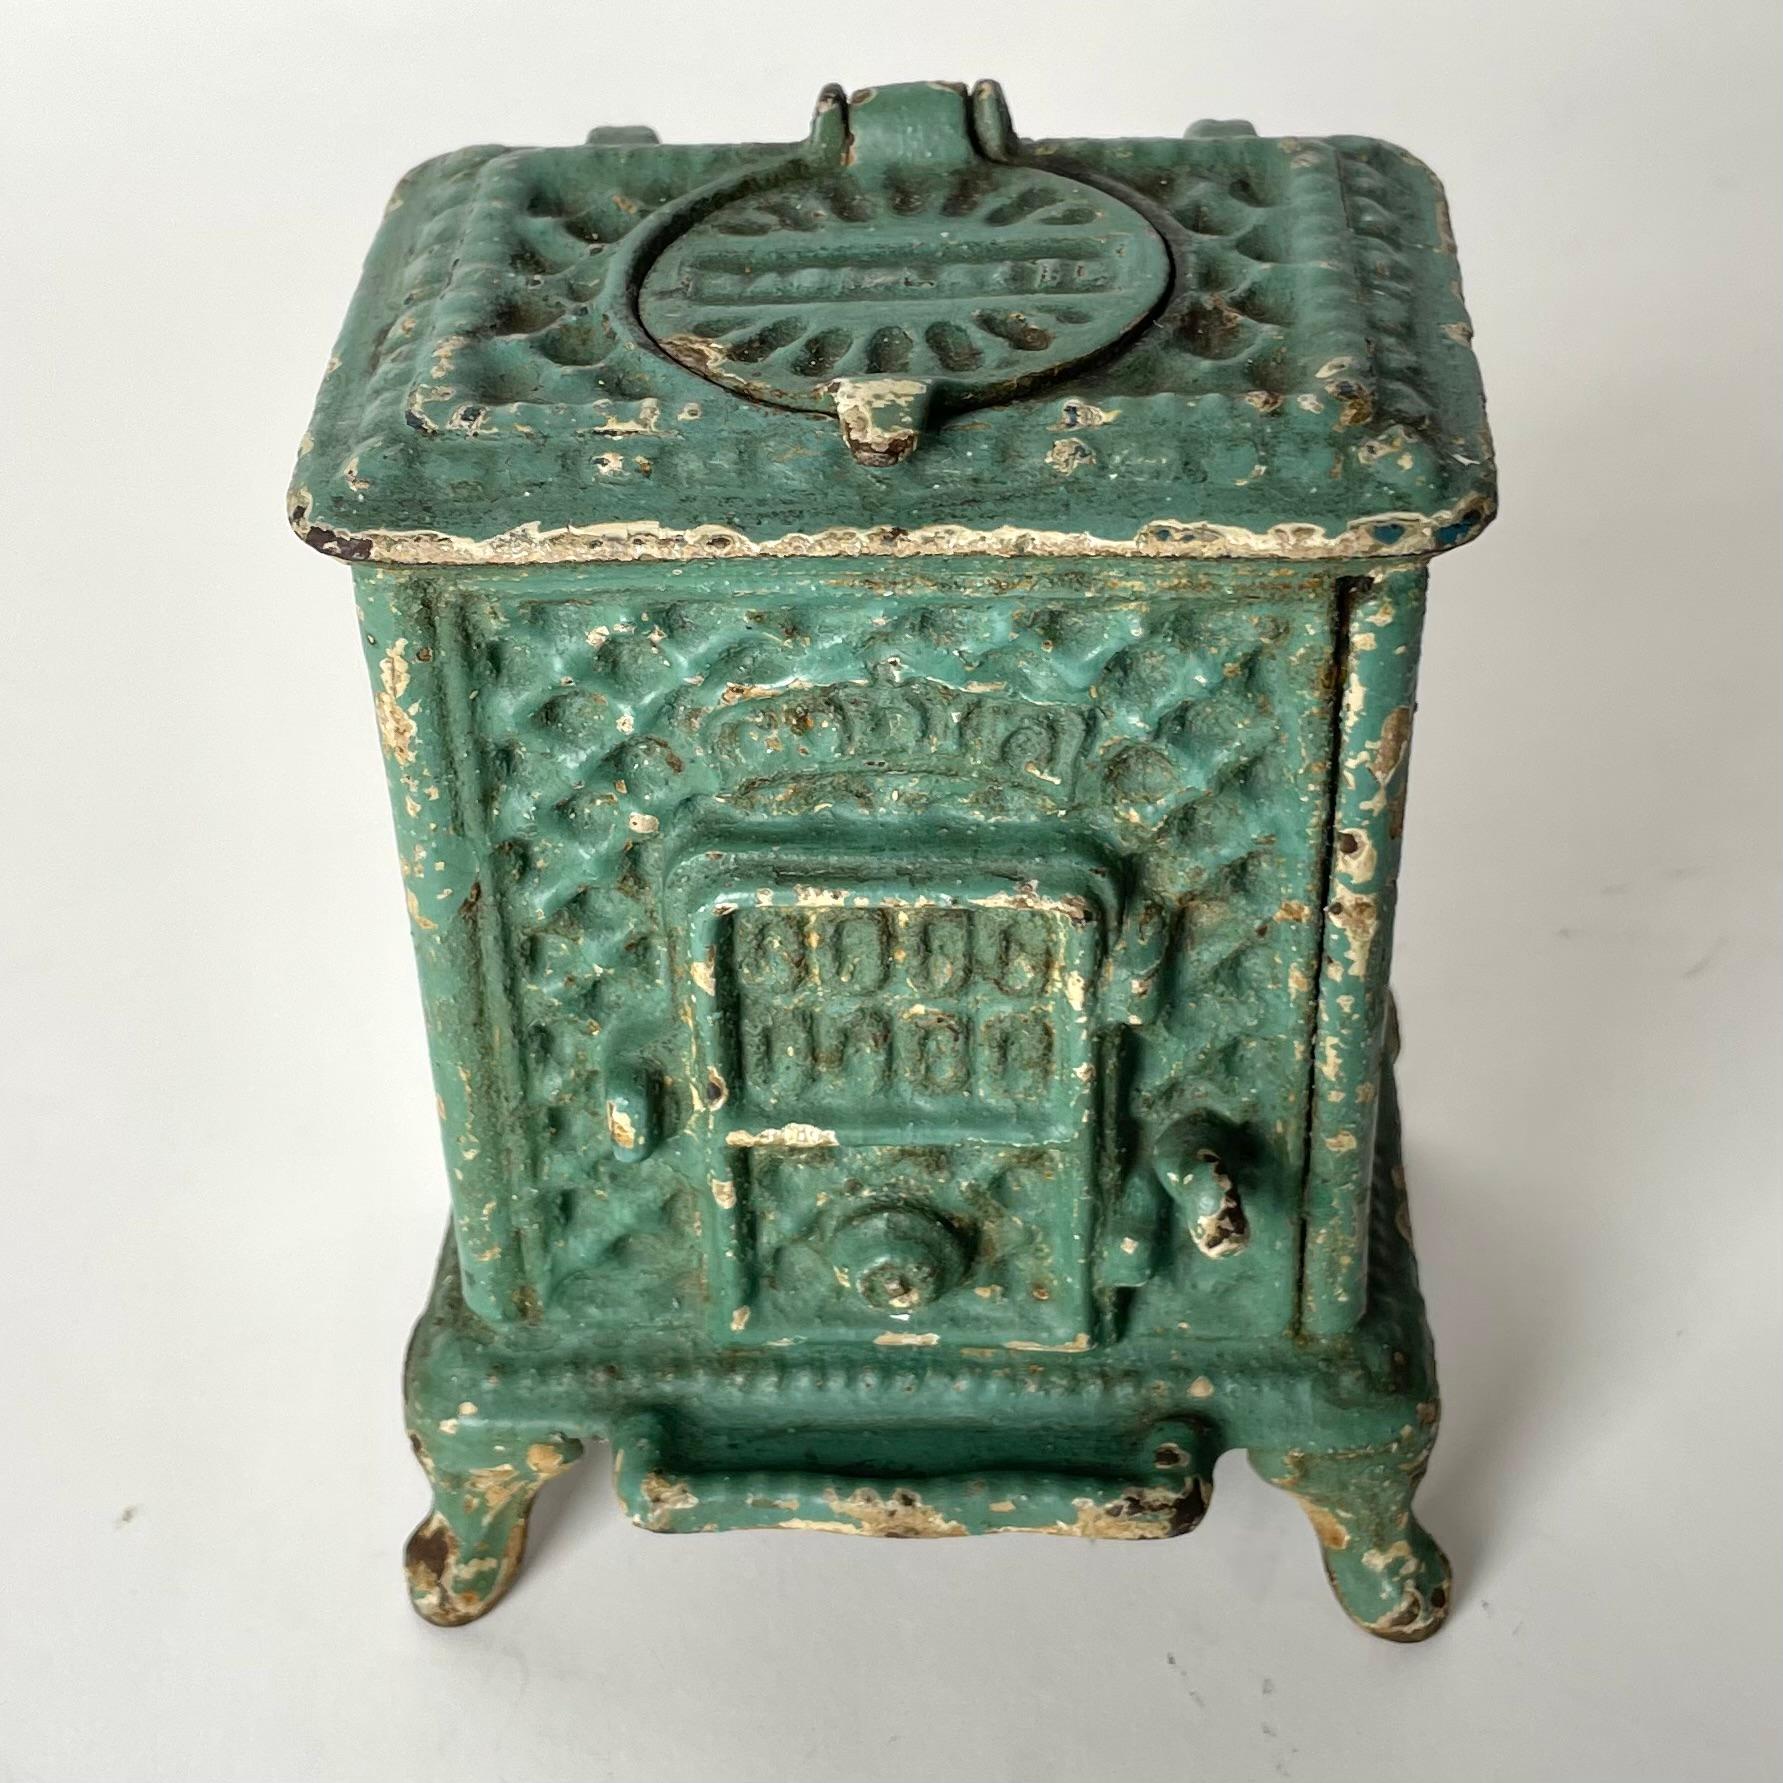 Cool Ink Well designed as a Godin iron stove from the late 19th Century. Made in France in cast iron and painted with a beautiful patina. Probably an advertising item from late 19th Century. The ink holder in glass with small chip (see